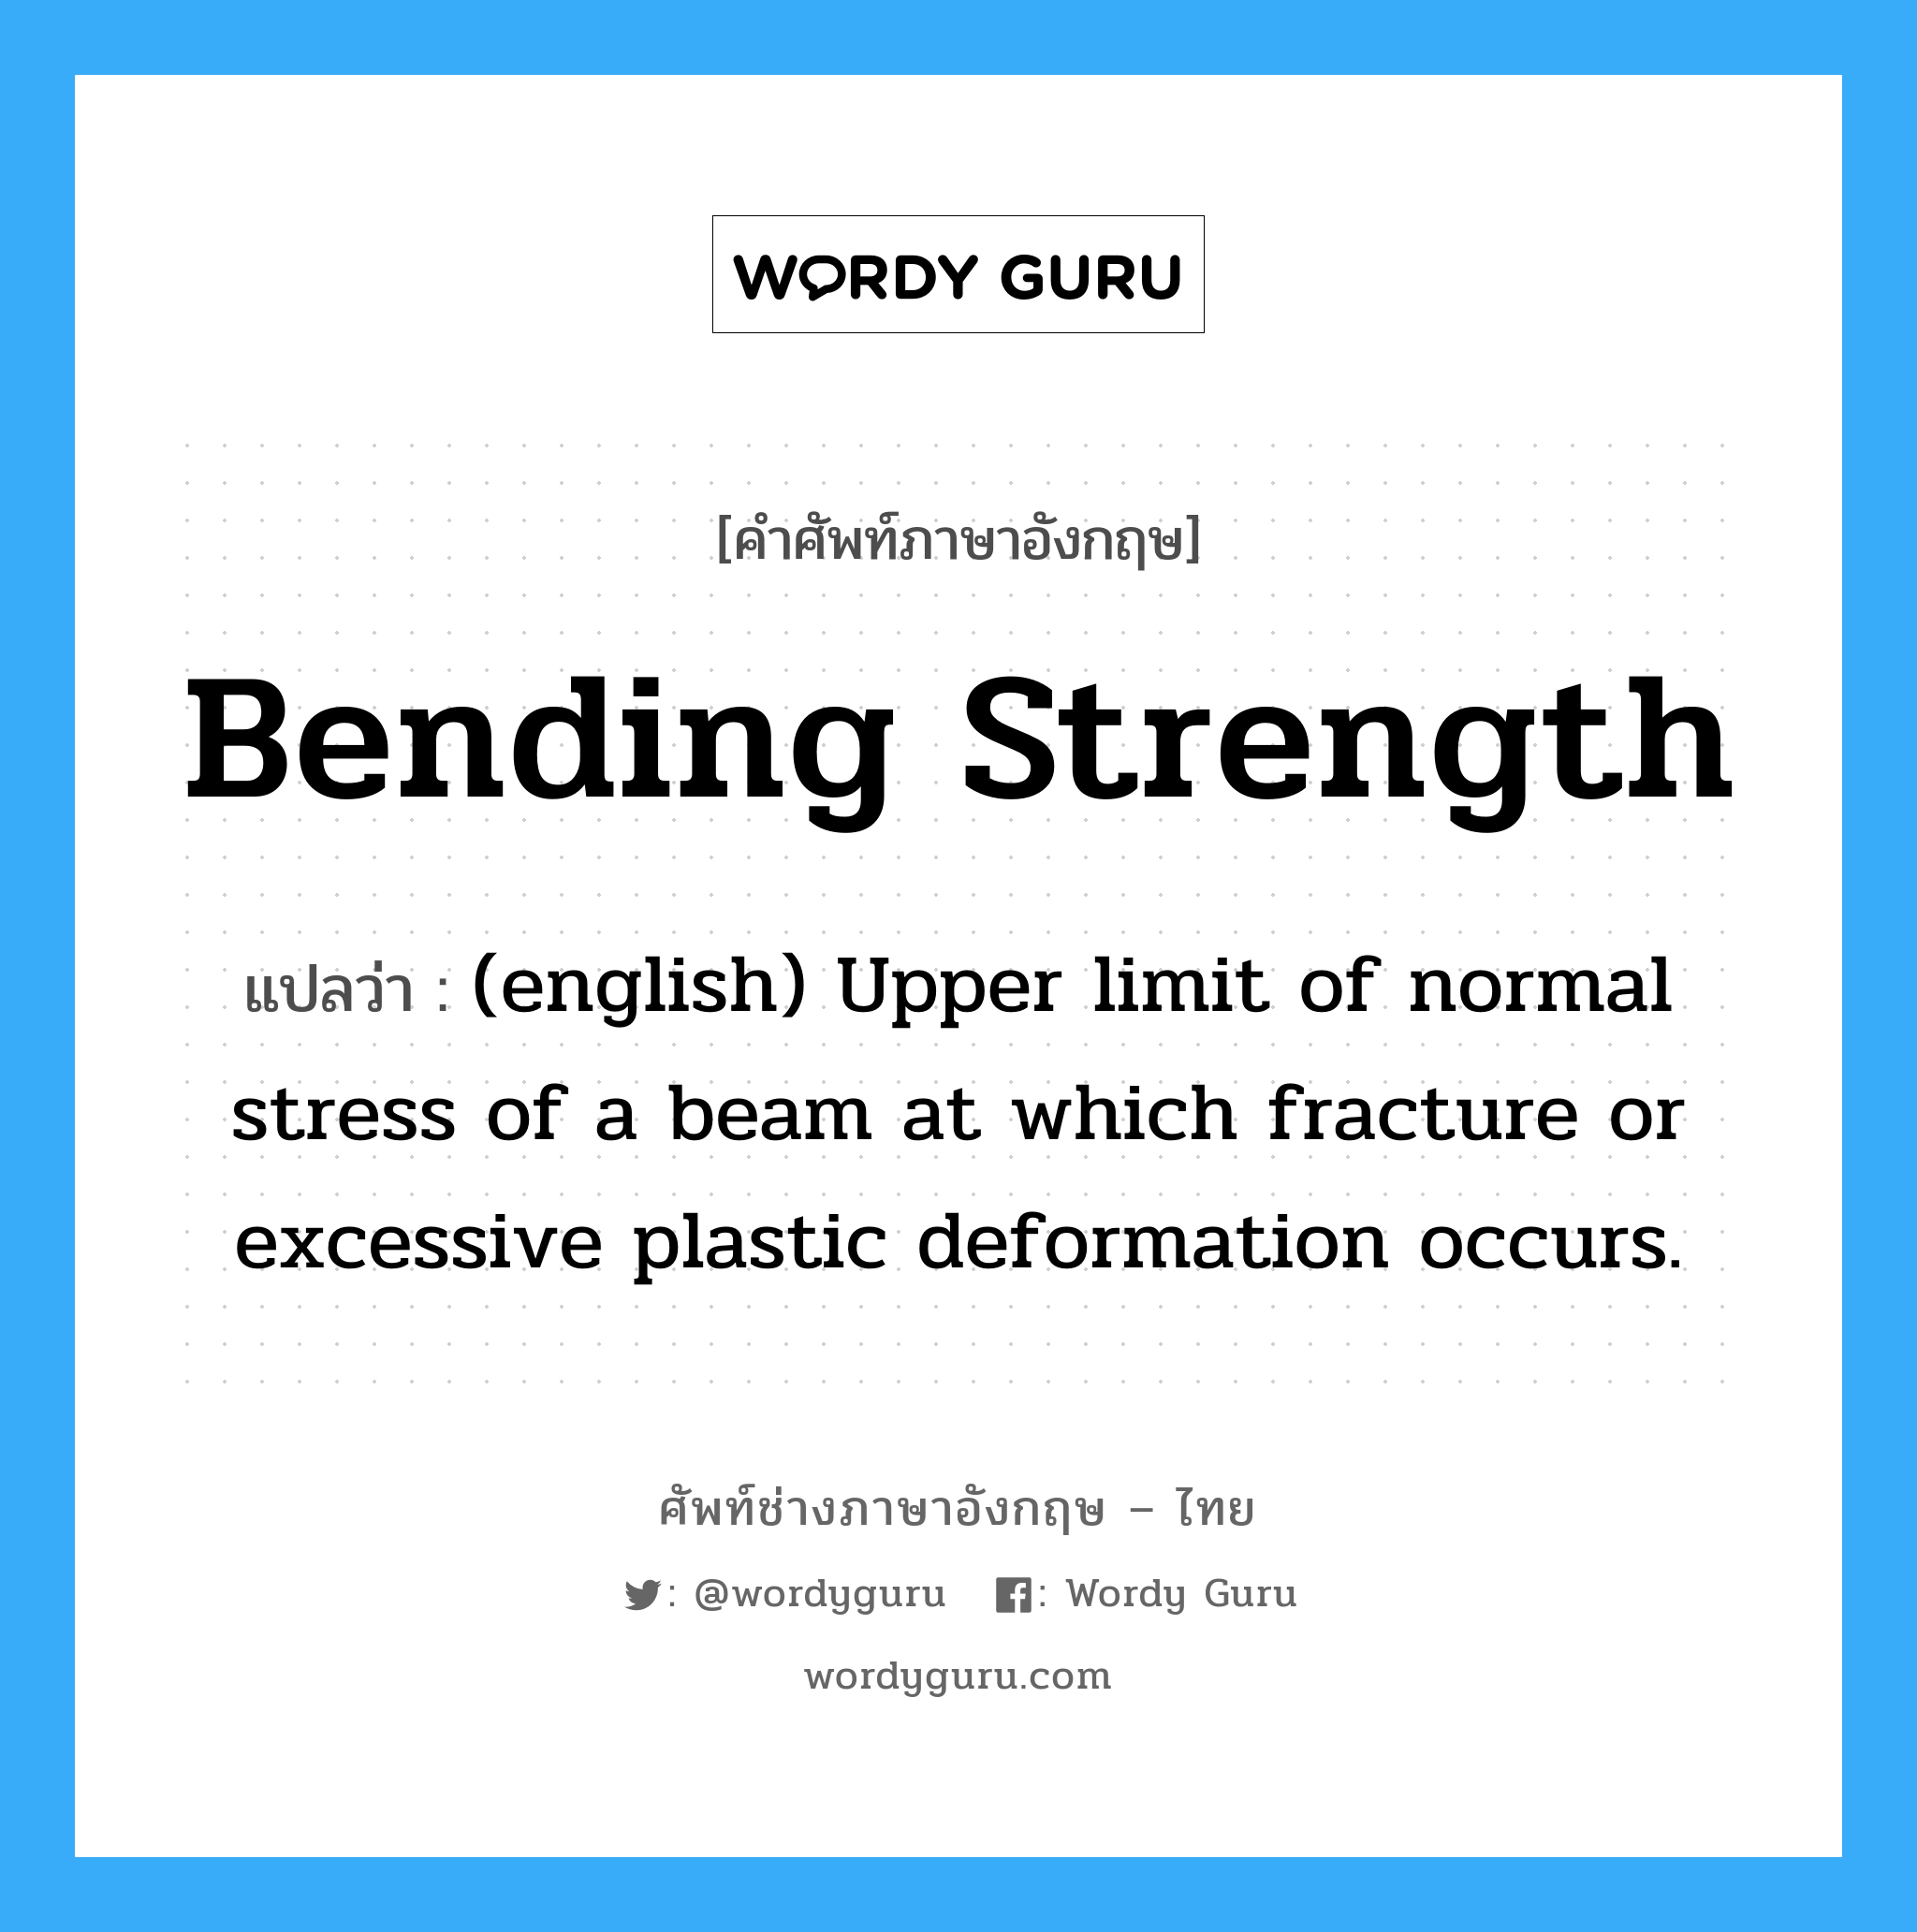 Bending Strength แปลว่า?, คำศัพท์ช่างภาษาอังกฤษ - ไทย Bending Strength คำศัพท์ภาษาอังกฤษ Bending Strength แปลว่า (english) Upper limit of normal stress of a beam at which fracture or excessive plastic deformation occurs.